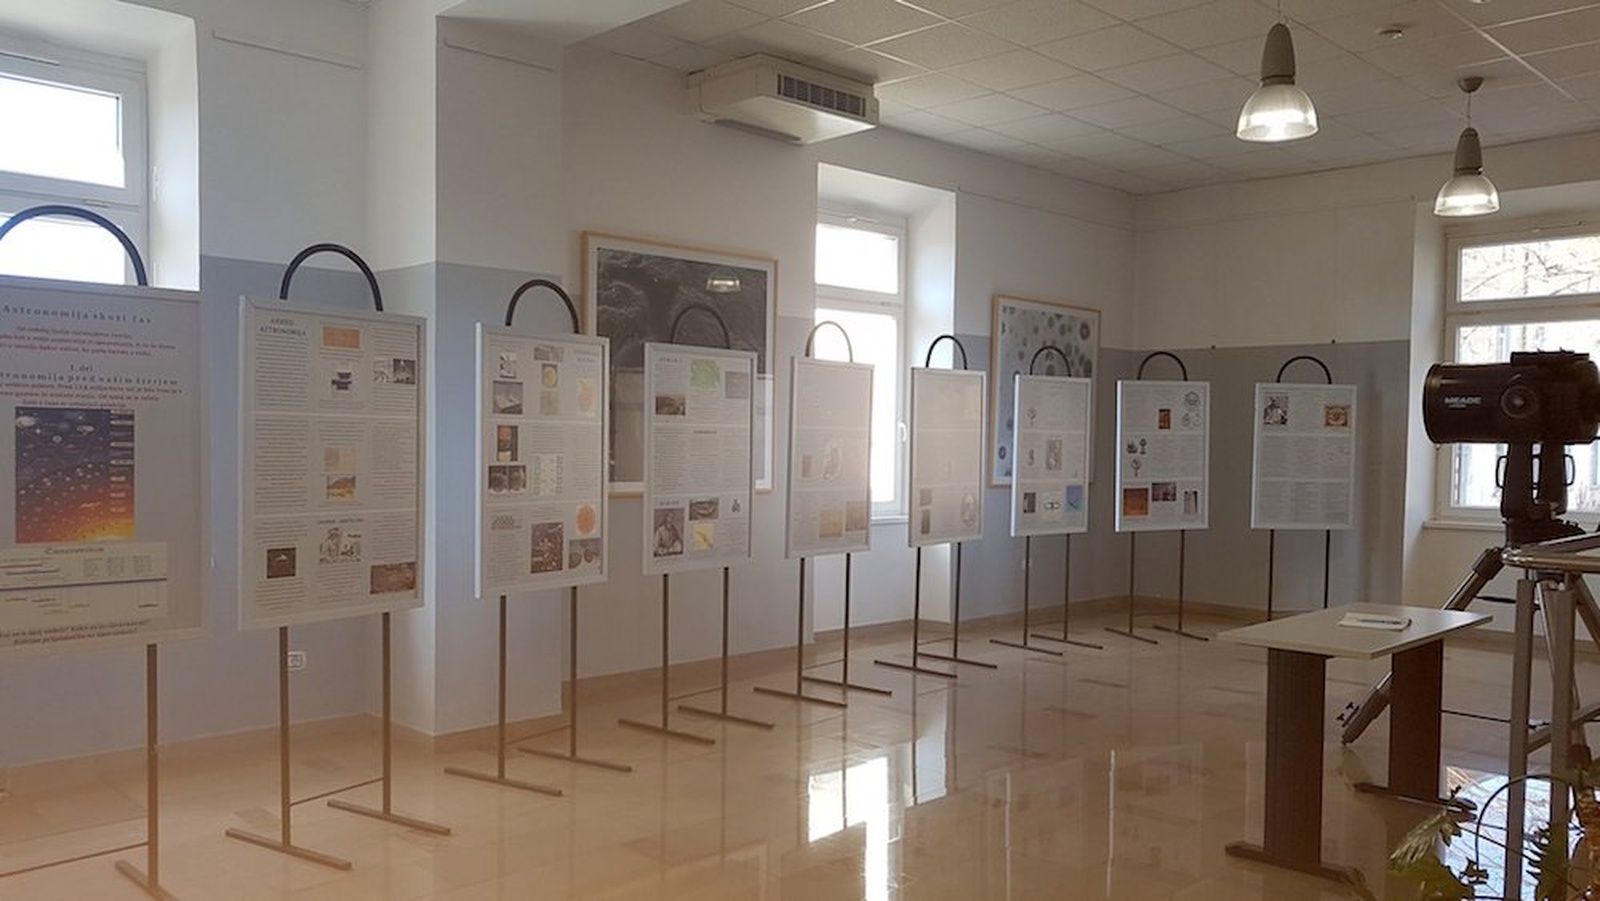 Exhibition "Astronomy through the Ages" at the University of Nova Gorica